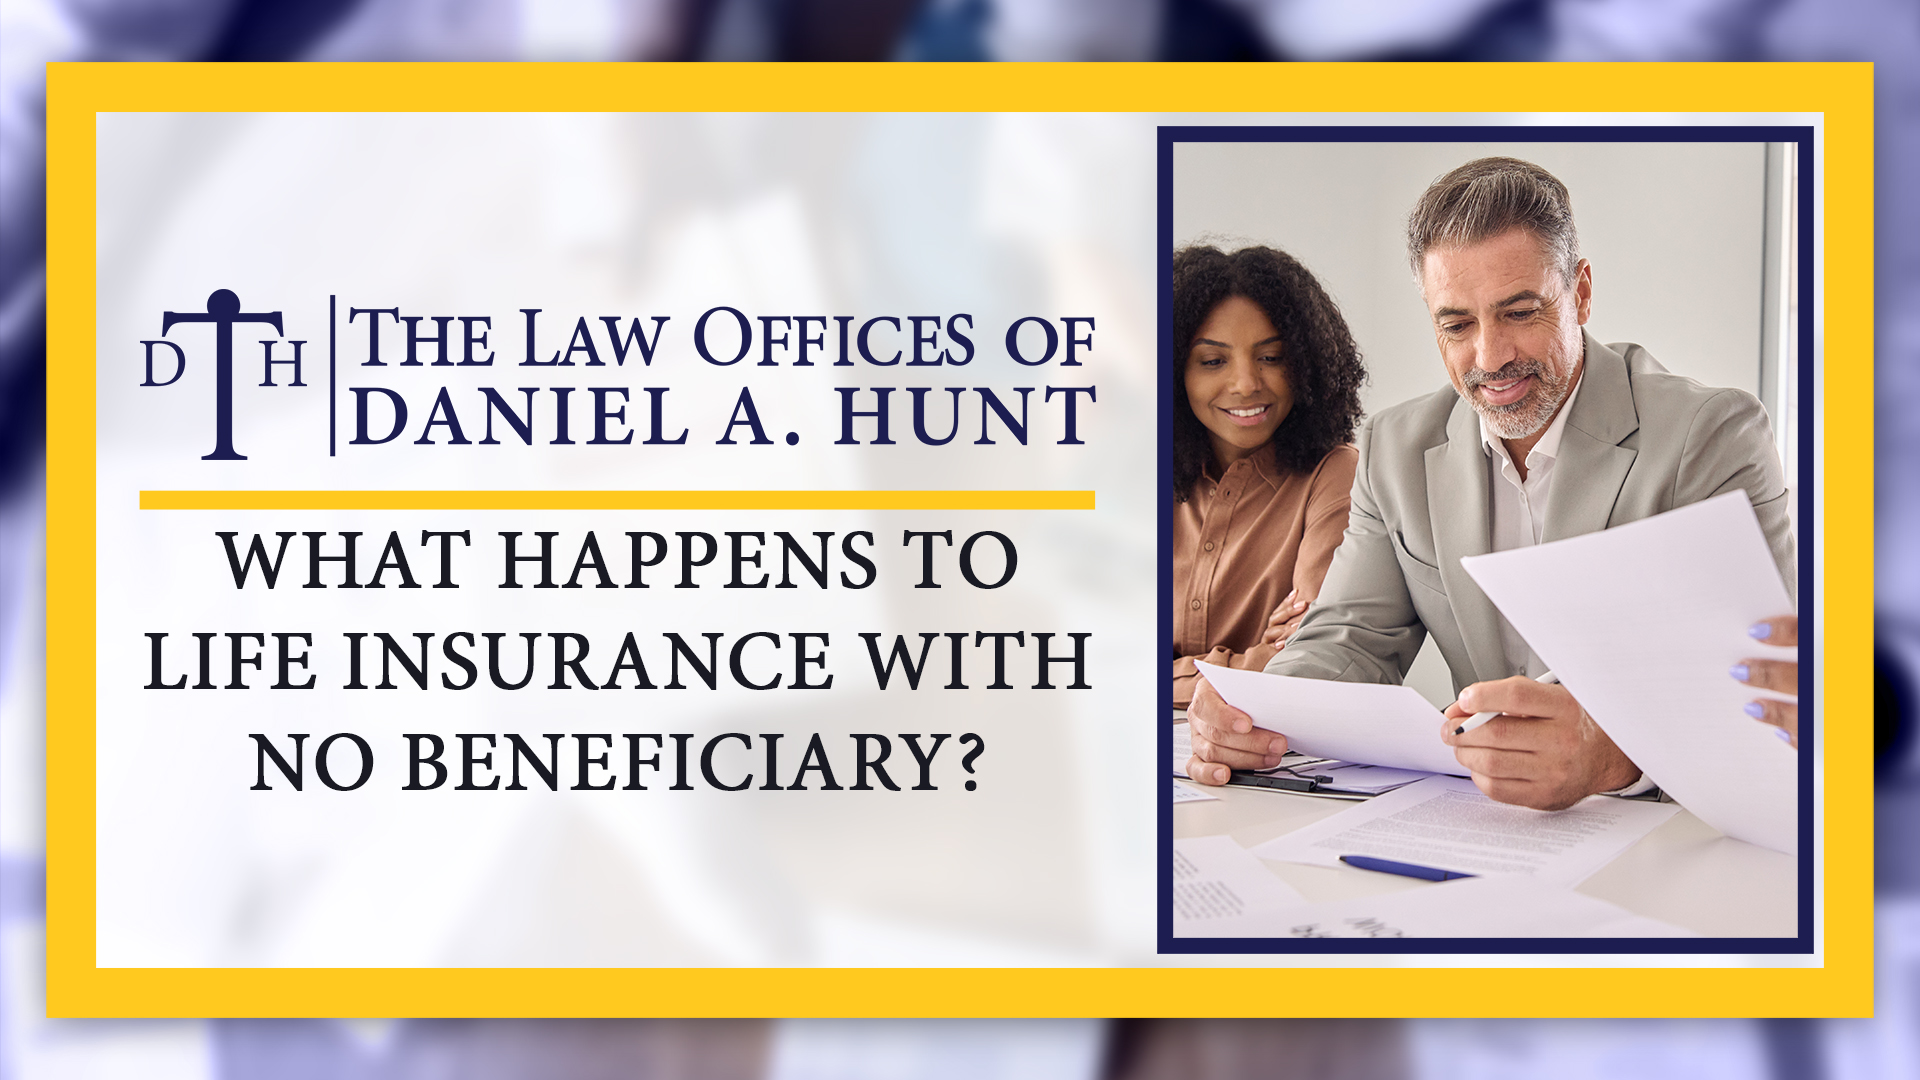 What Happens to Life Insurance with No Beneficiary